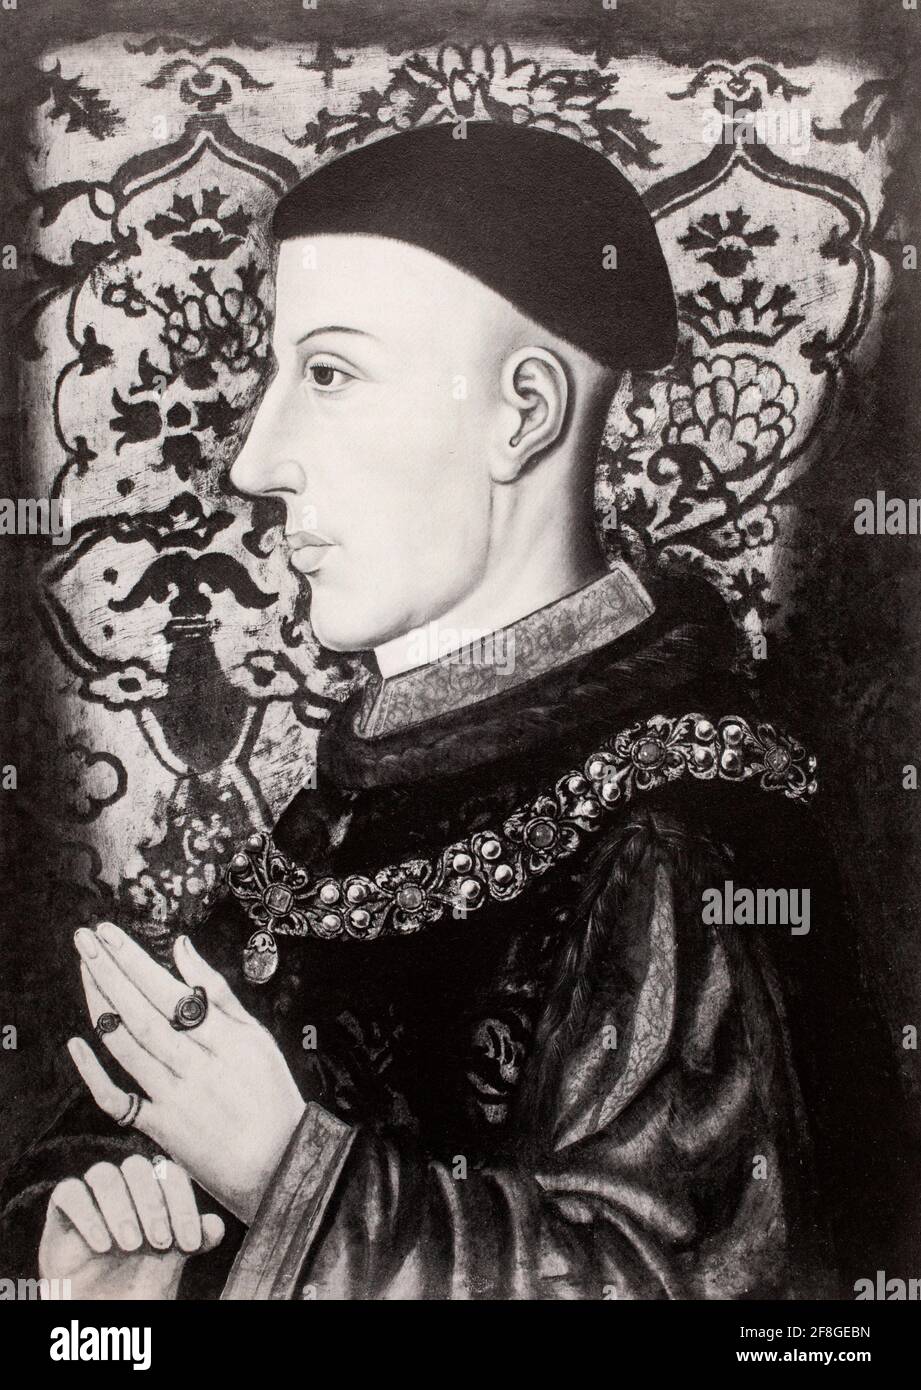 A portrait of Henry V 1386-1422), also called Henry of Monmouth, he was King of England from 1413 until his death in 1422. Despite his relatively short reign, Henry's outstanding military successes in the Hundred Years' War against France made England one of the strongest military powers in Europe and Henry is known and celebrated as one of the greatest warrior kings of medieval England. Stock Photo